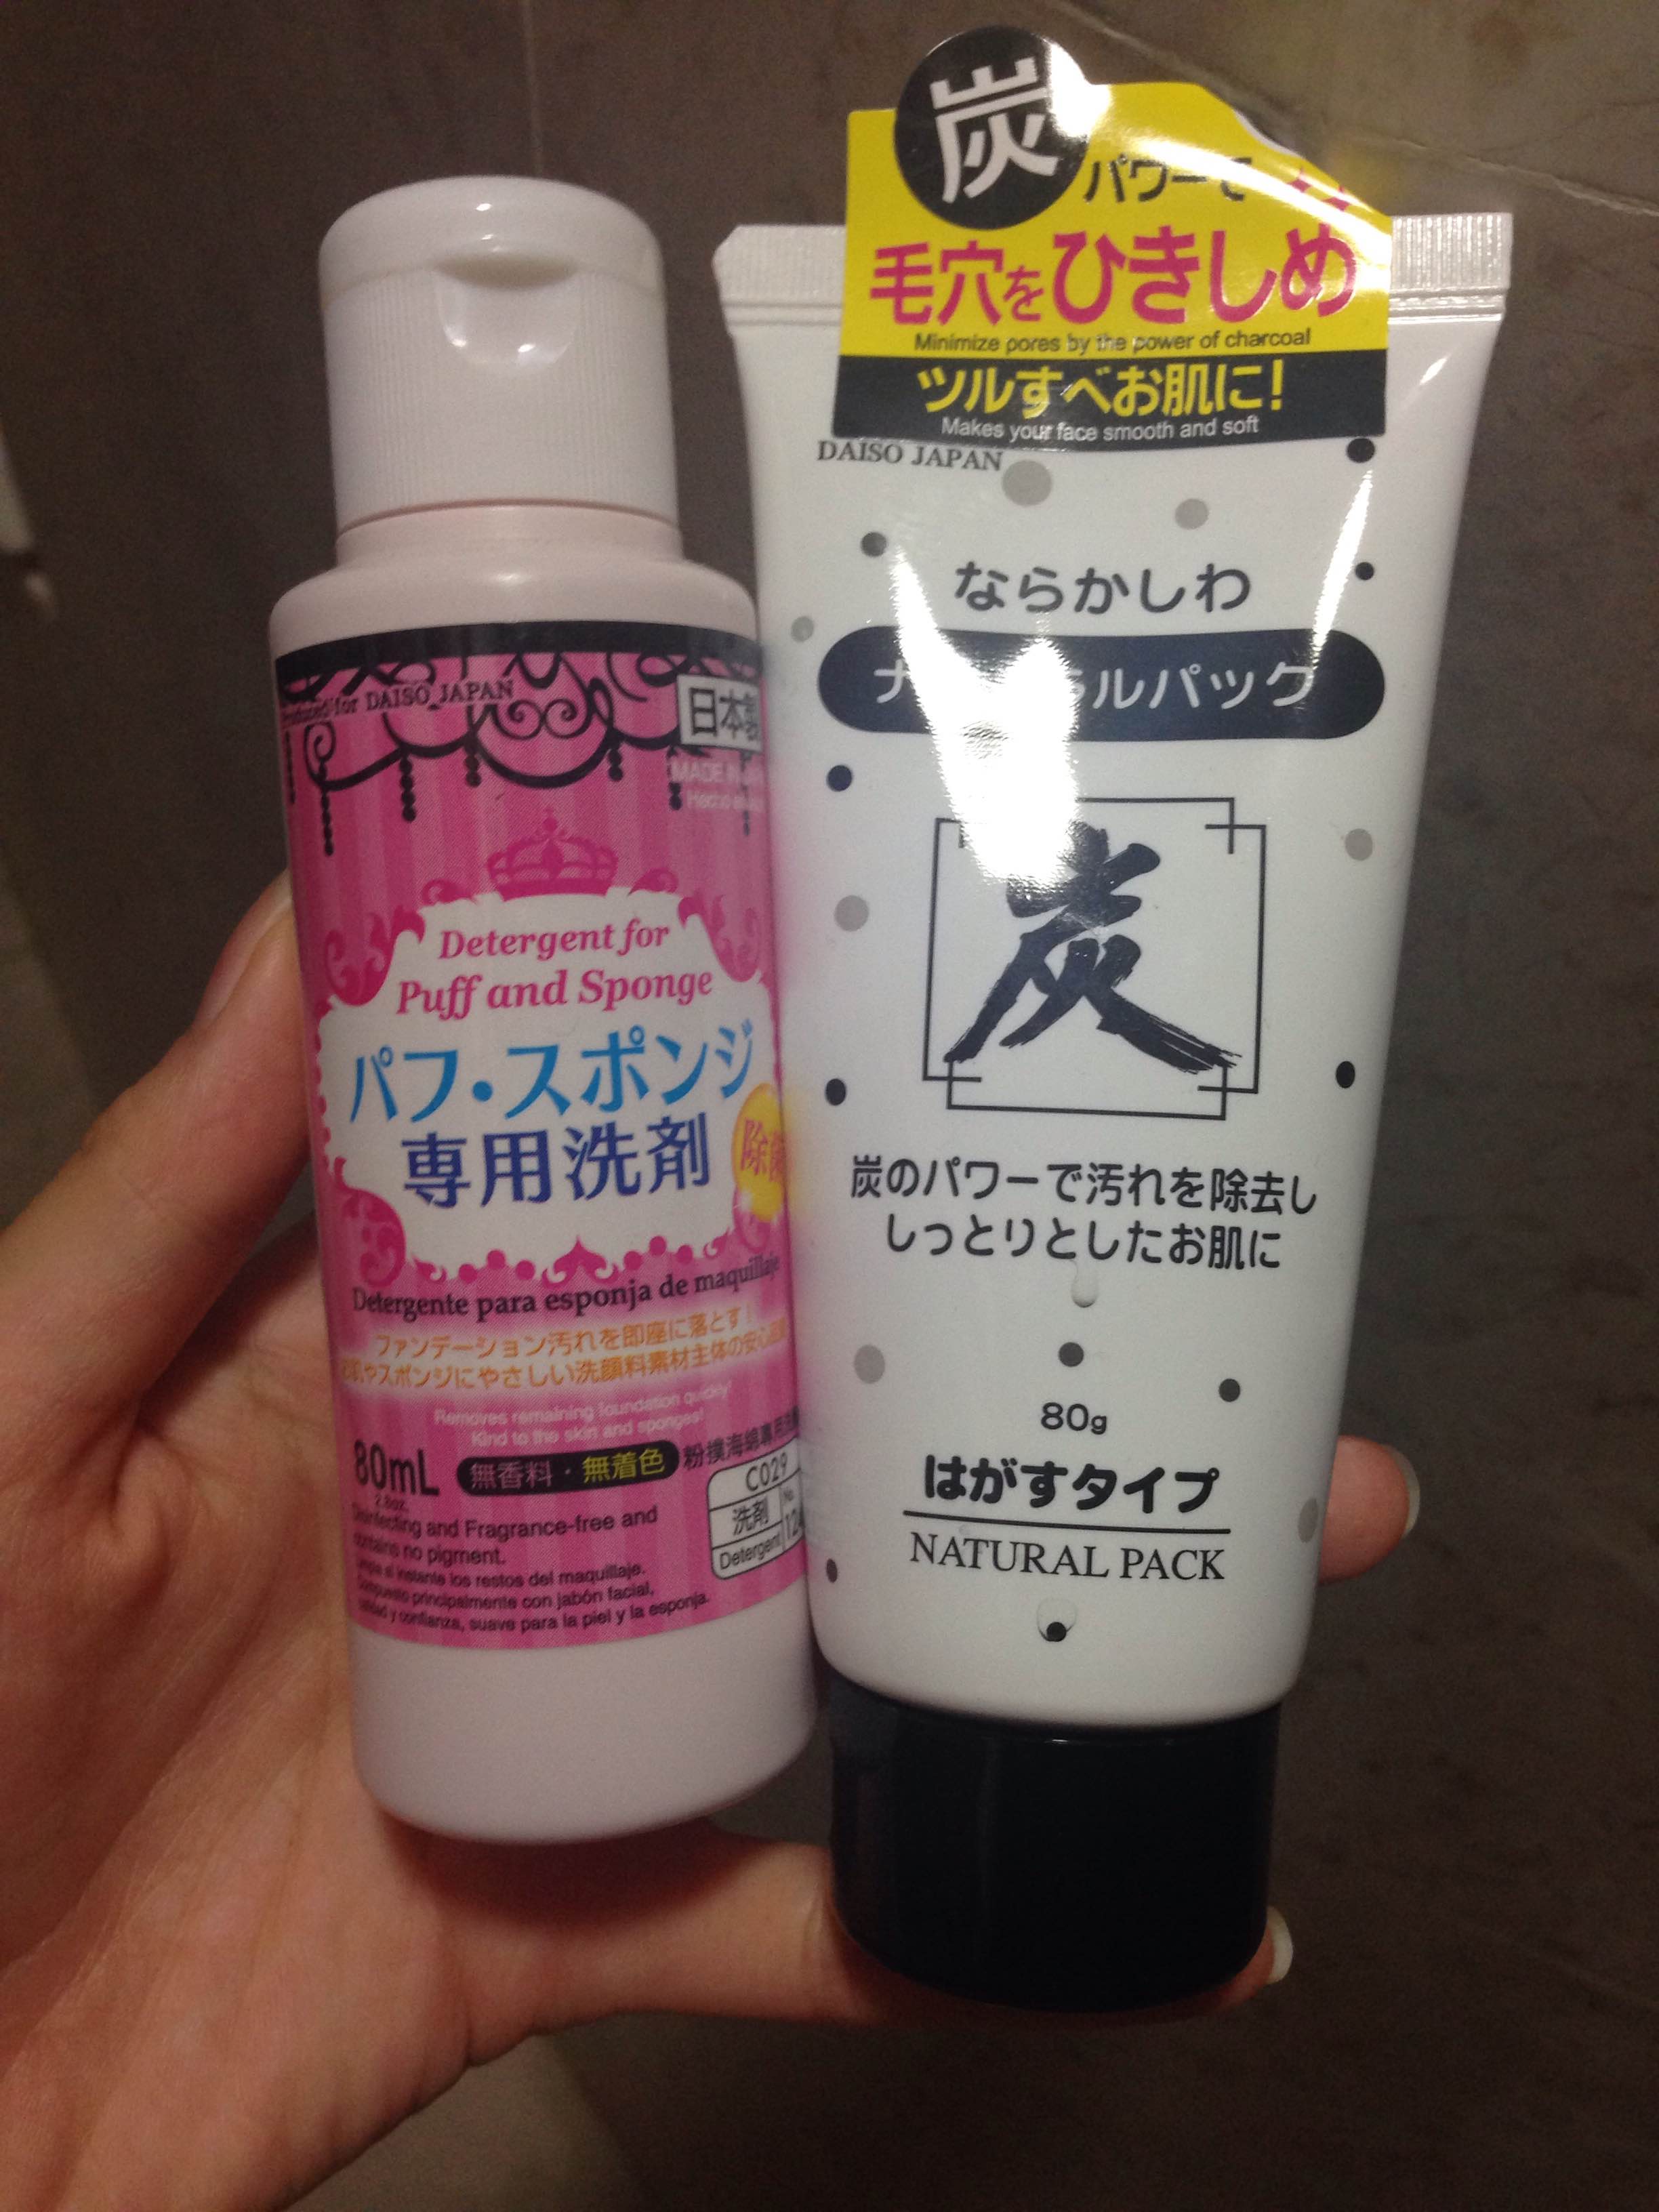 The Best Things To Buy In Daiso for $2 